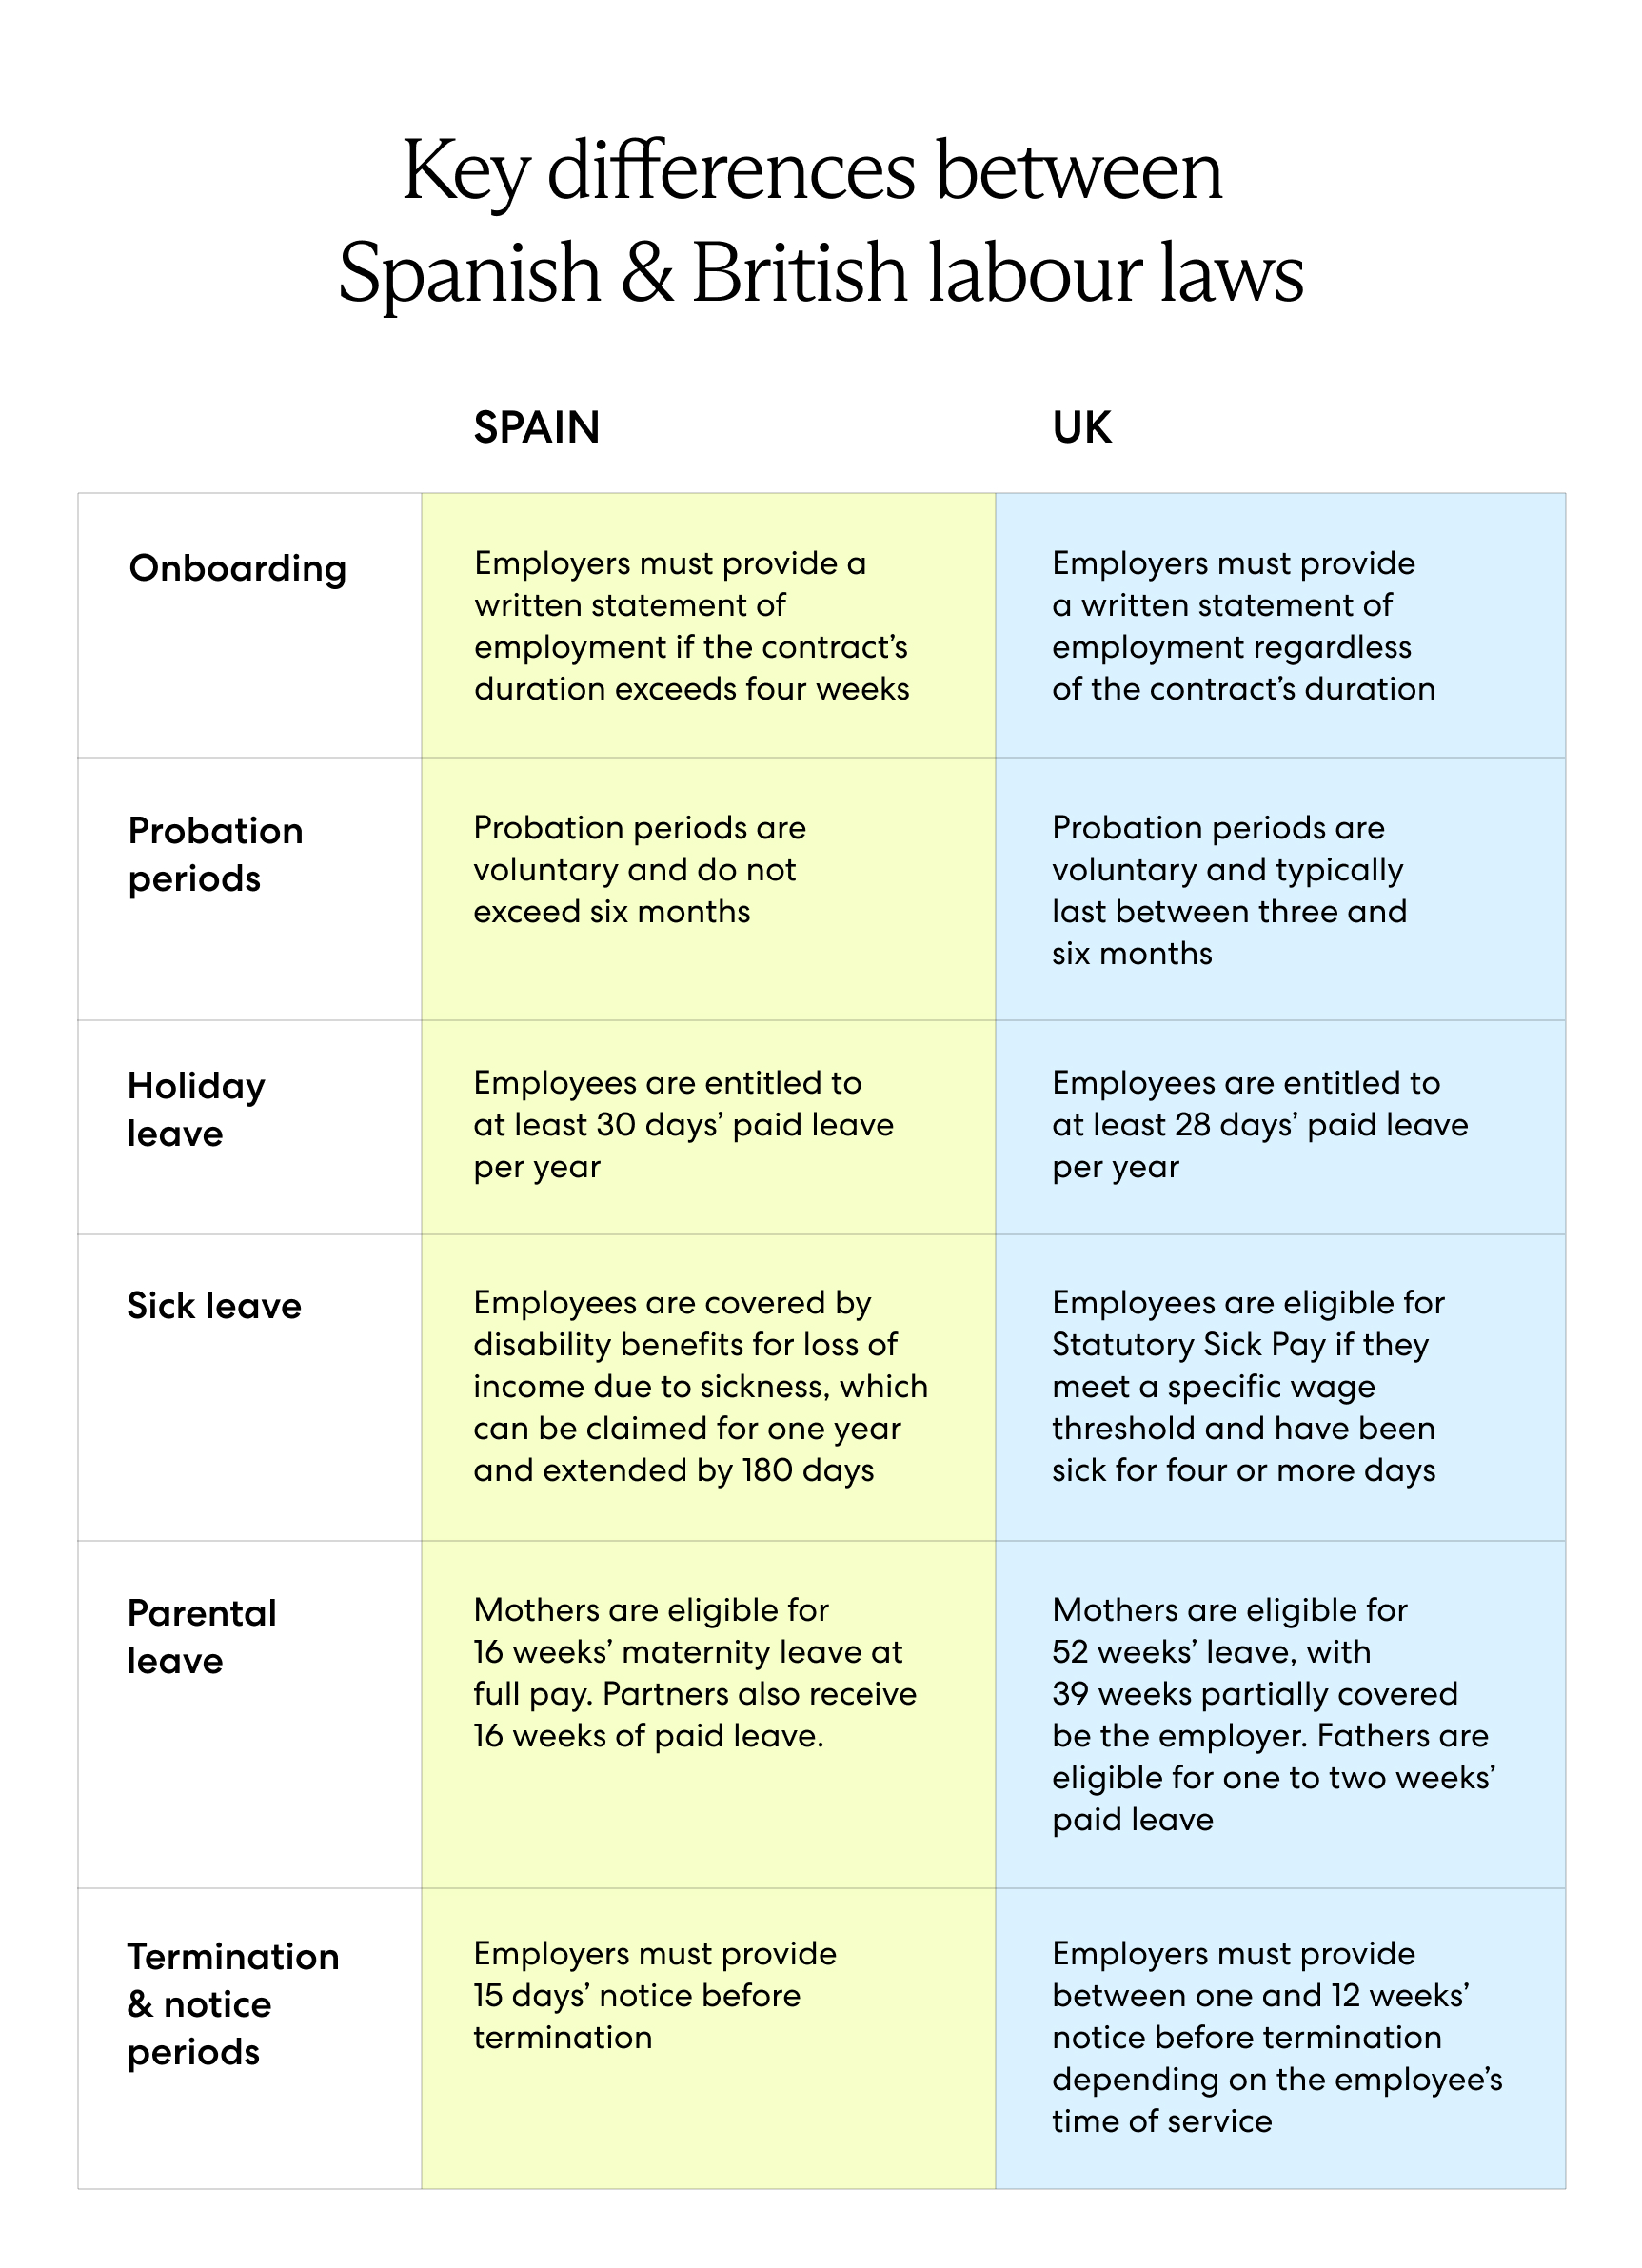 Comparing employment laws in Spain vs labour laws in the UK